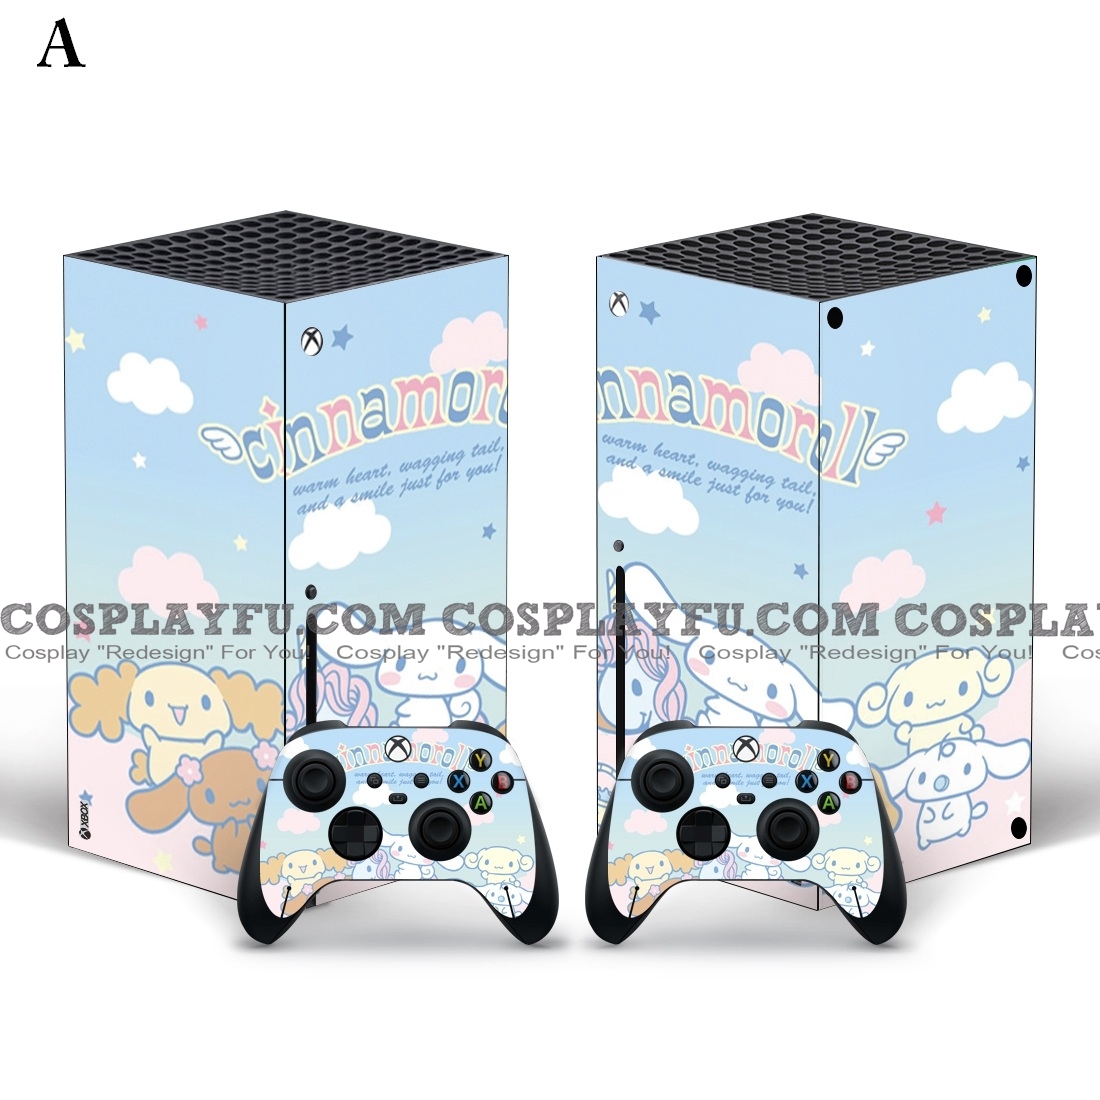 Japanese Cane Skin Decal Per Xbox Series X Console And Controller, Pieno Wrap Vinyl Cosplay